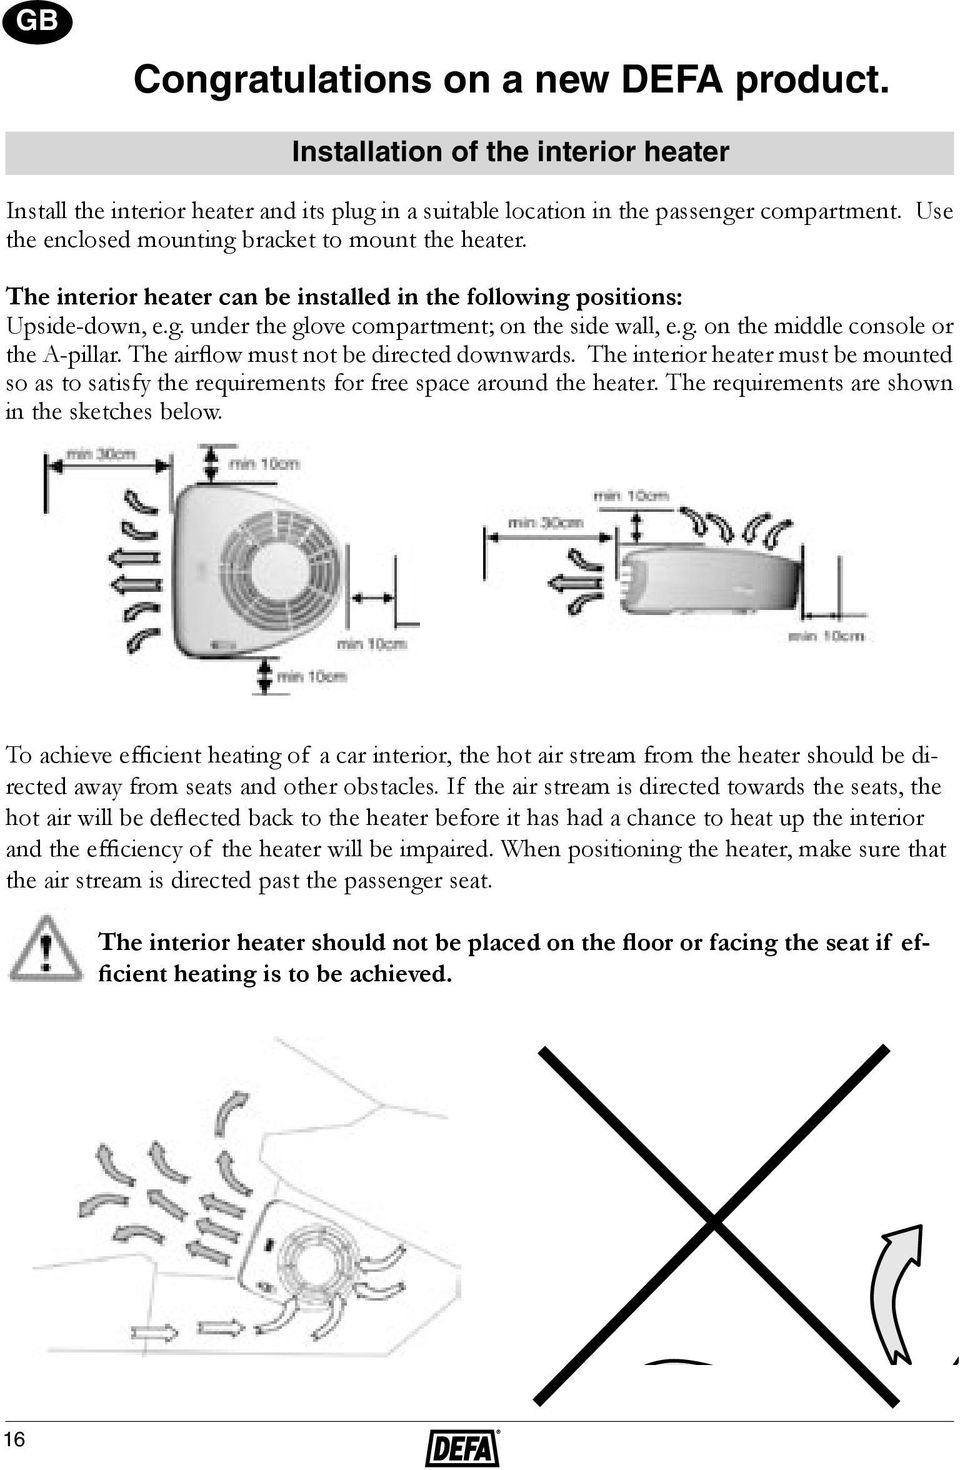 The airflow must not be directed downwards. The interior heater must be mounted so as to satisfy the requirements for free space around the heater. The requirements are shown in the sketches below.